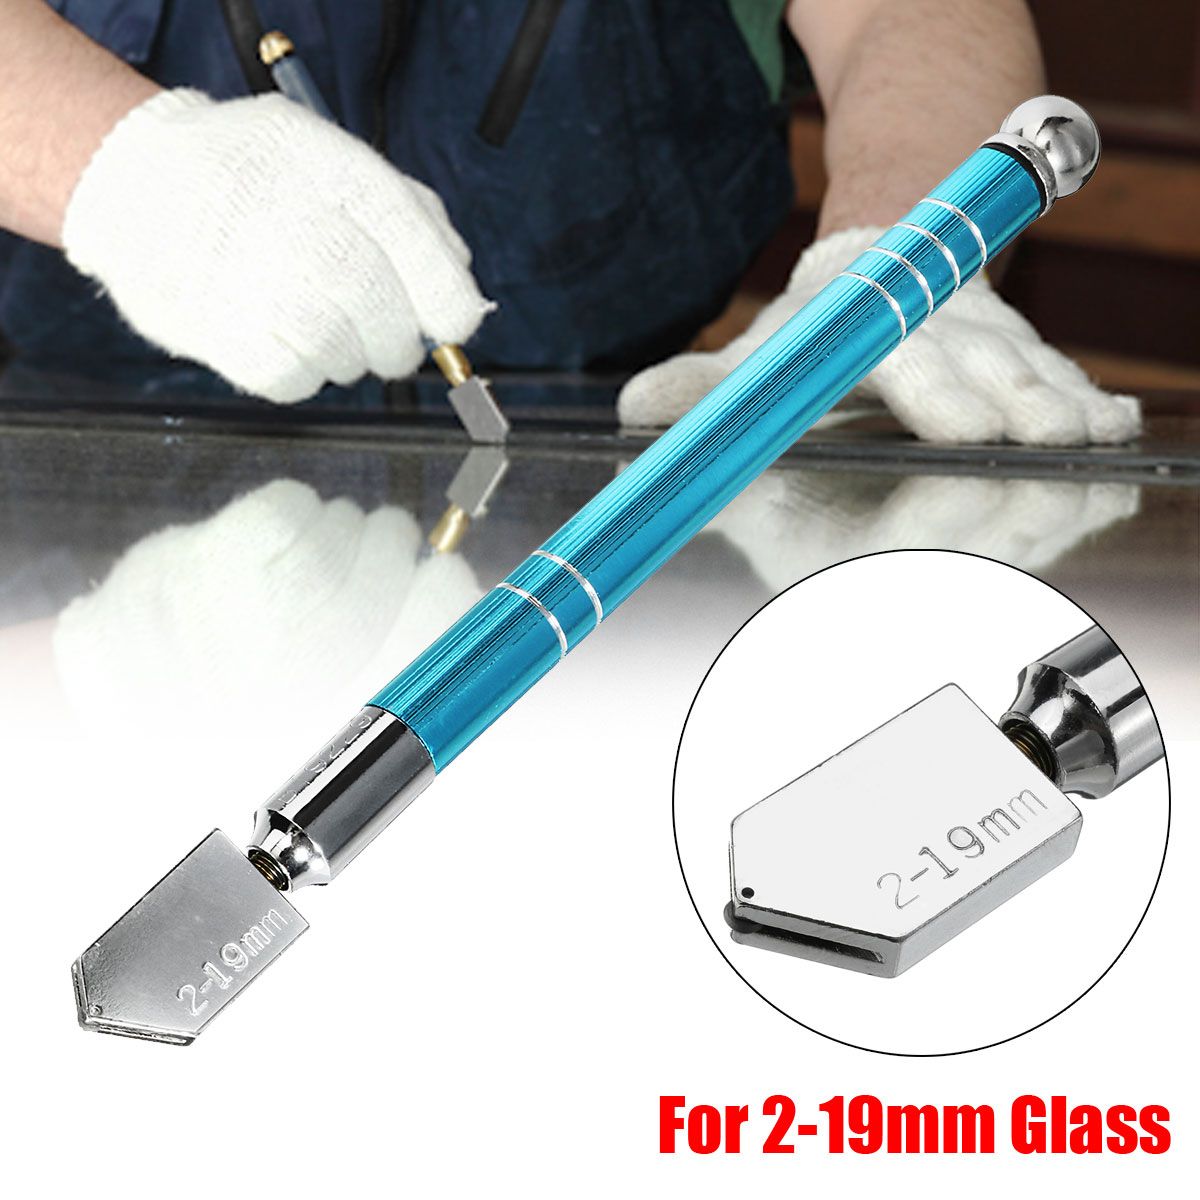 Portable-Glass-Cutter-Anti-Slip-Handle-Diamond-Minerals-Tipped-Glass-Cutter-for-2-19mm-Glass-1285318